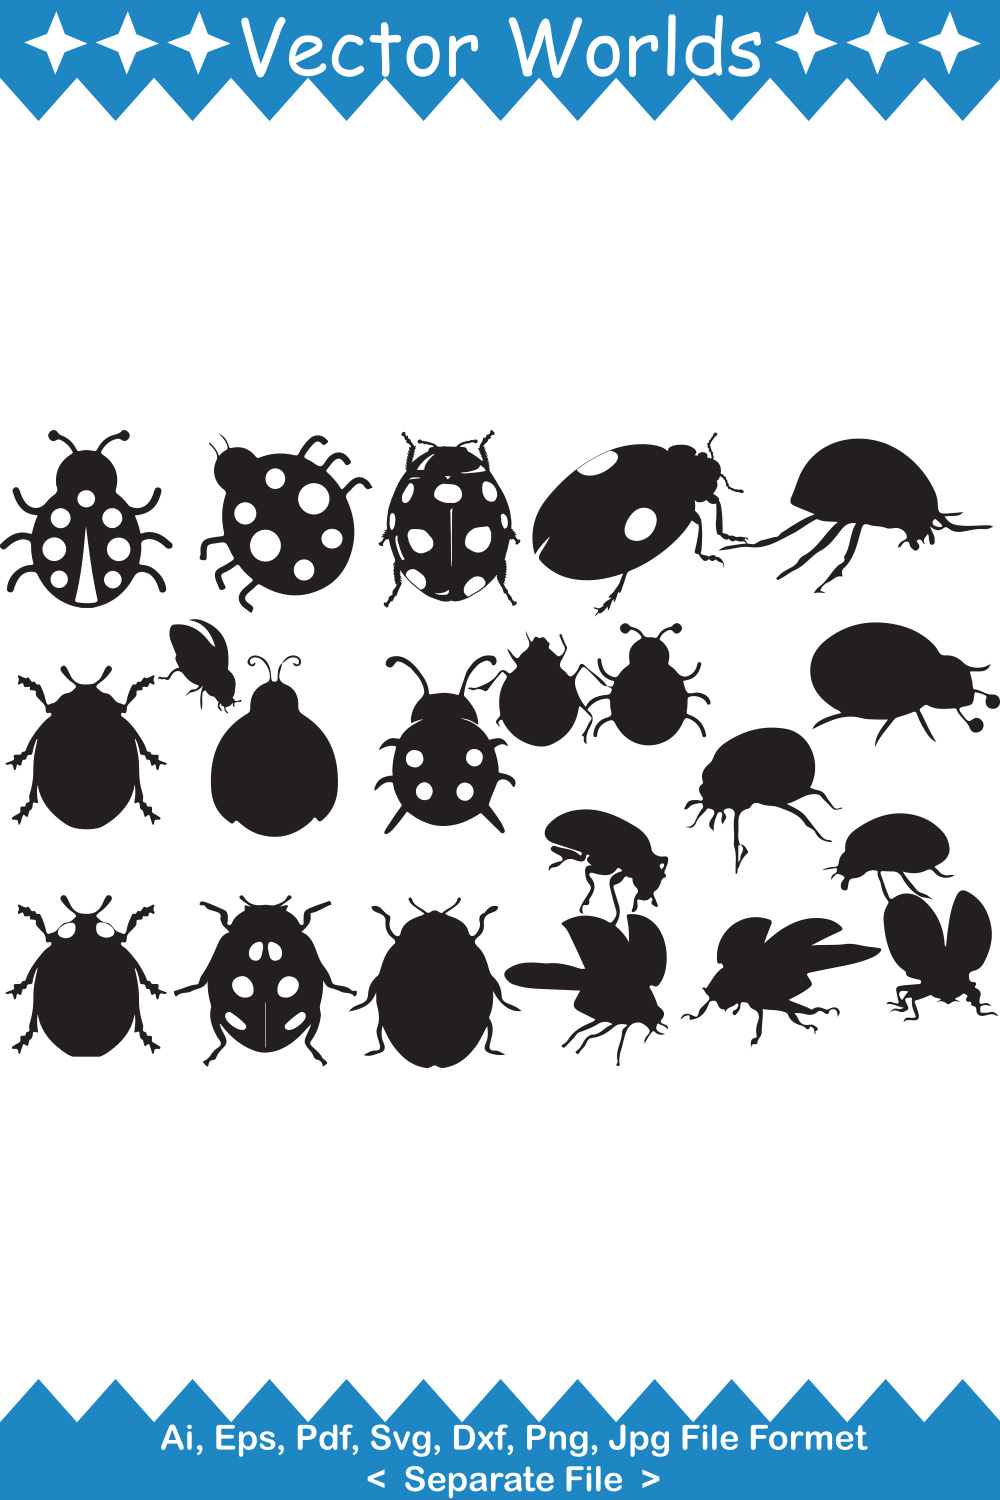 Group of bugs silhouettes on a white background.